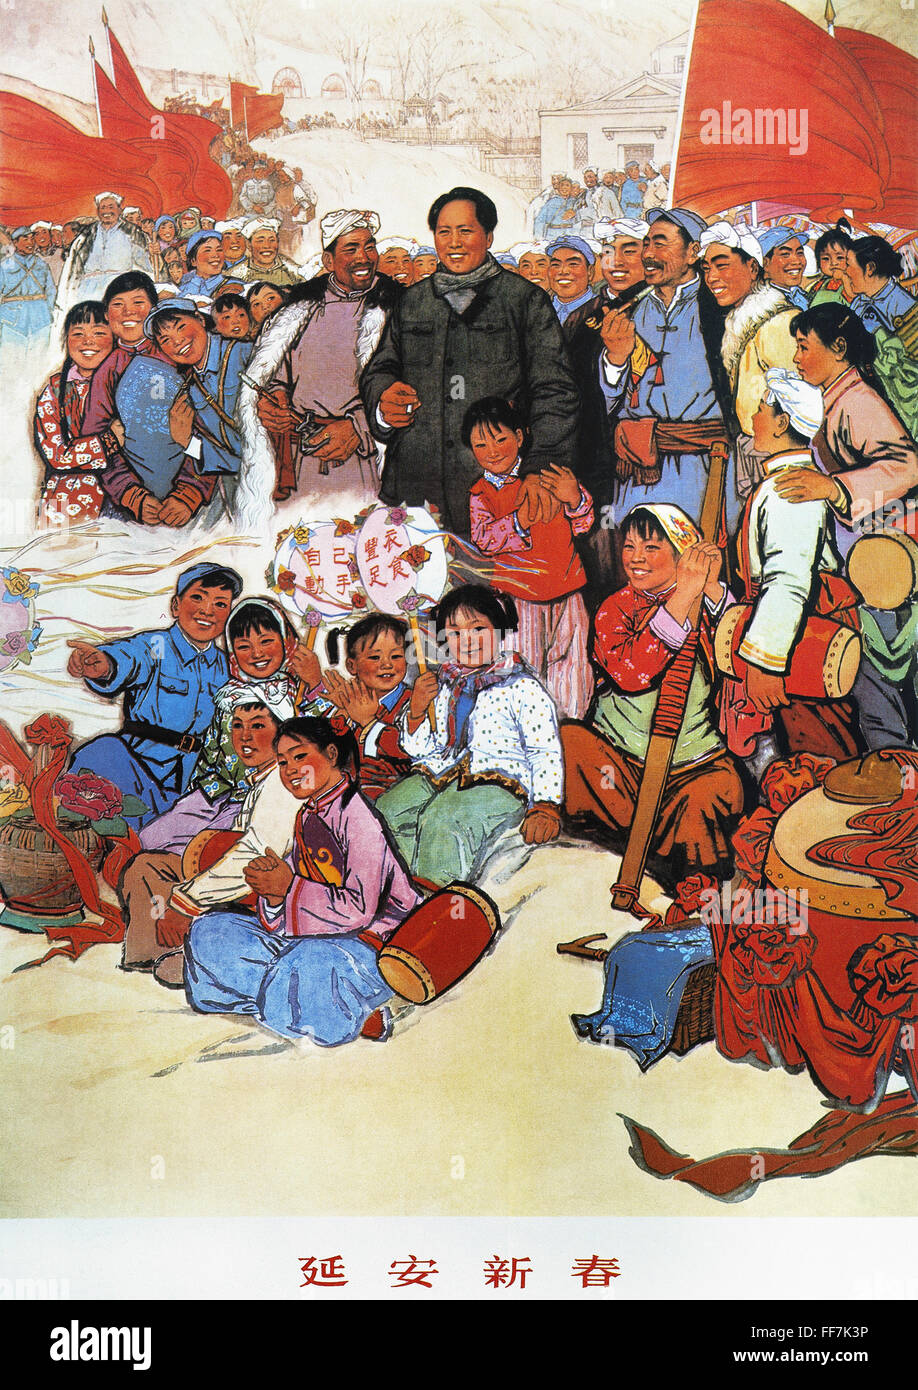 CHINA: POSTER, 1973. /n'New Year in Yenan' (Mao Tse-tung and his followers at Yenan, the Chinese Communist base established after the Long March of 1934-35). Chinese poster, 1973. Stock Photo